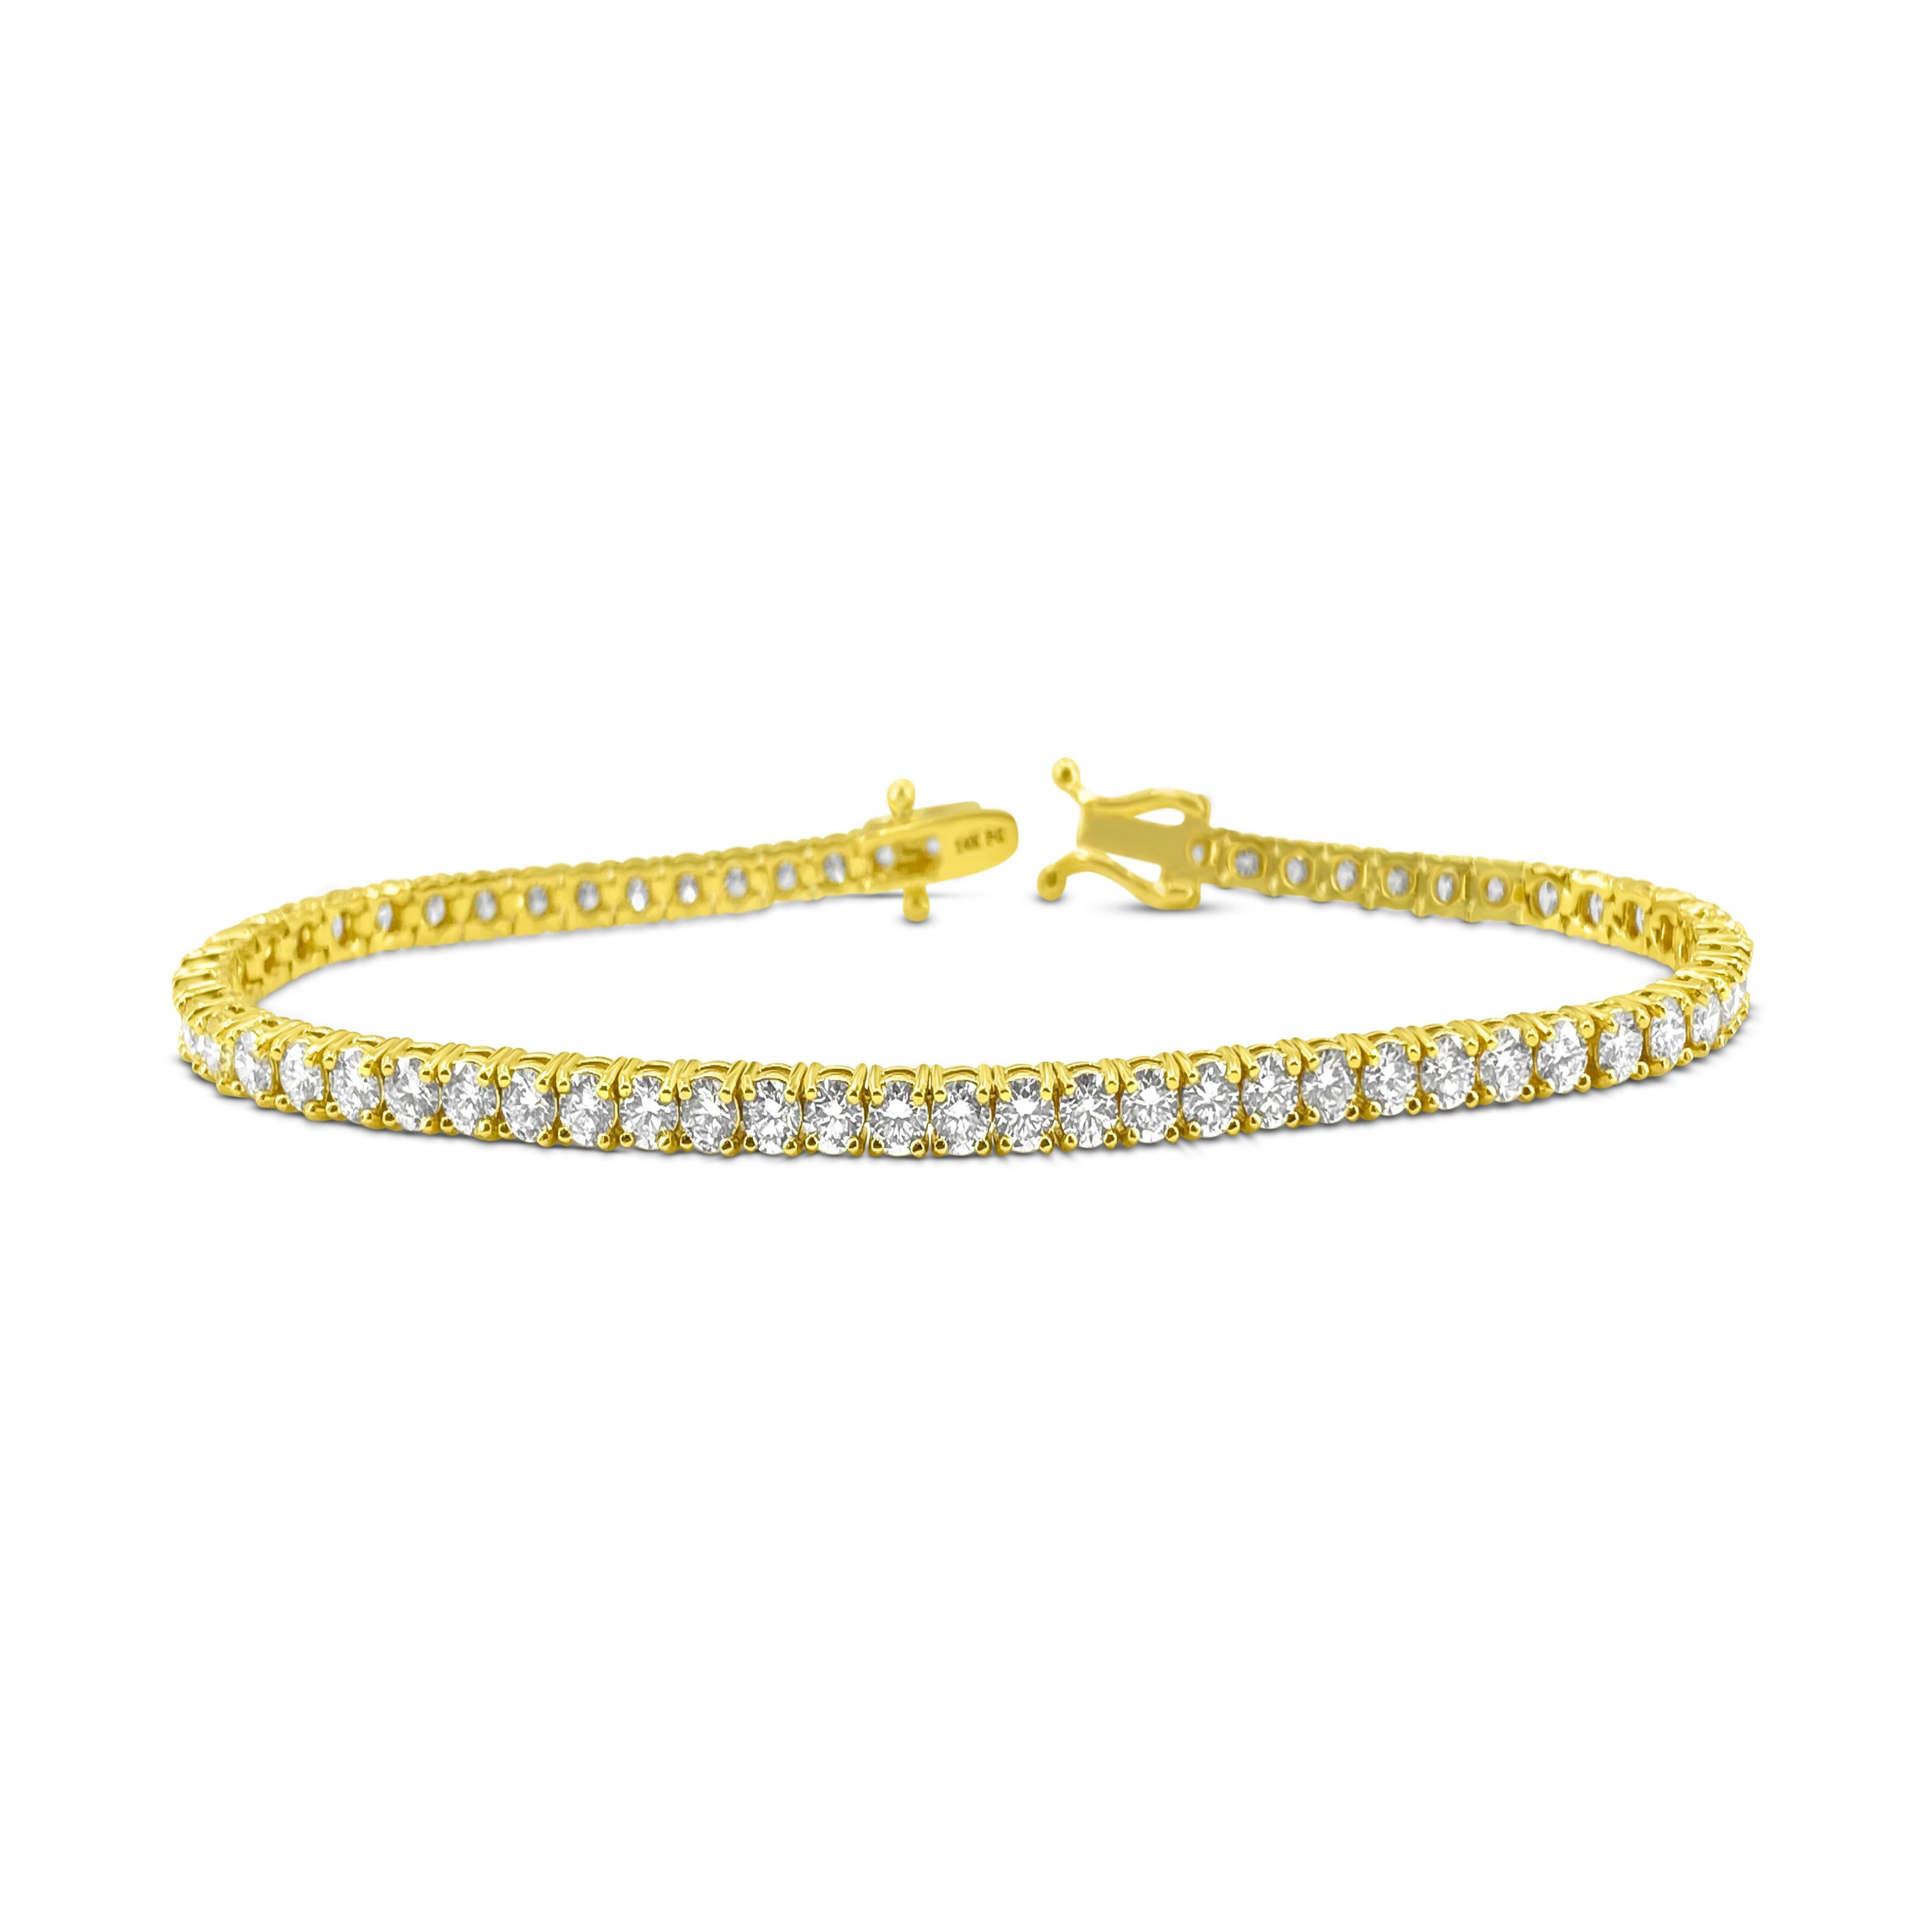 Step into elegance with our Unisex Diamond Tennis Bracelet, crafted from radiant 14k yellow gold. Adorned with a dazzling 6.25 carats of round brilliant cut diamonds, each boasting VVS clarity and H-I color, this bracelet exudes timeless